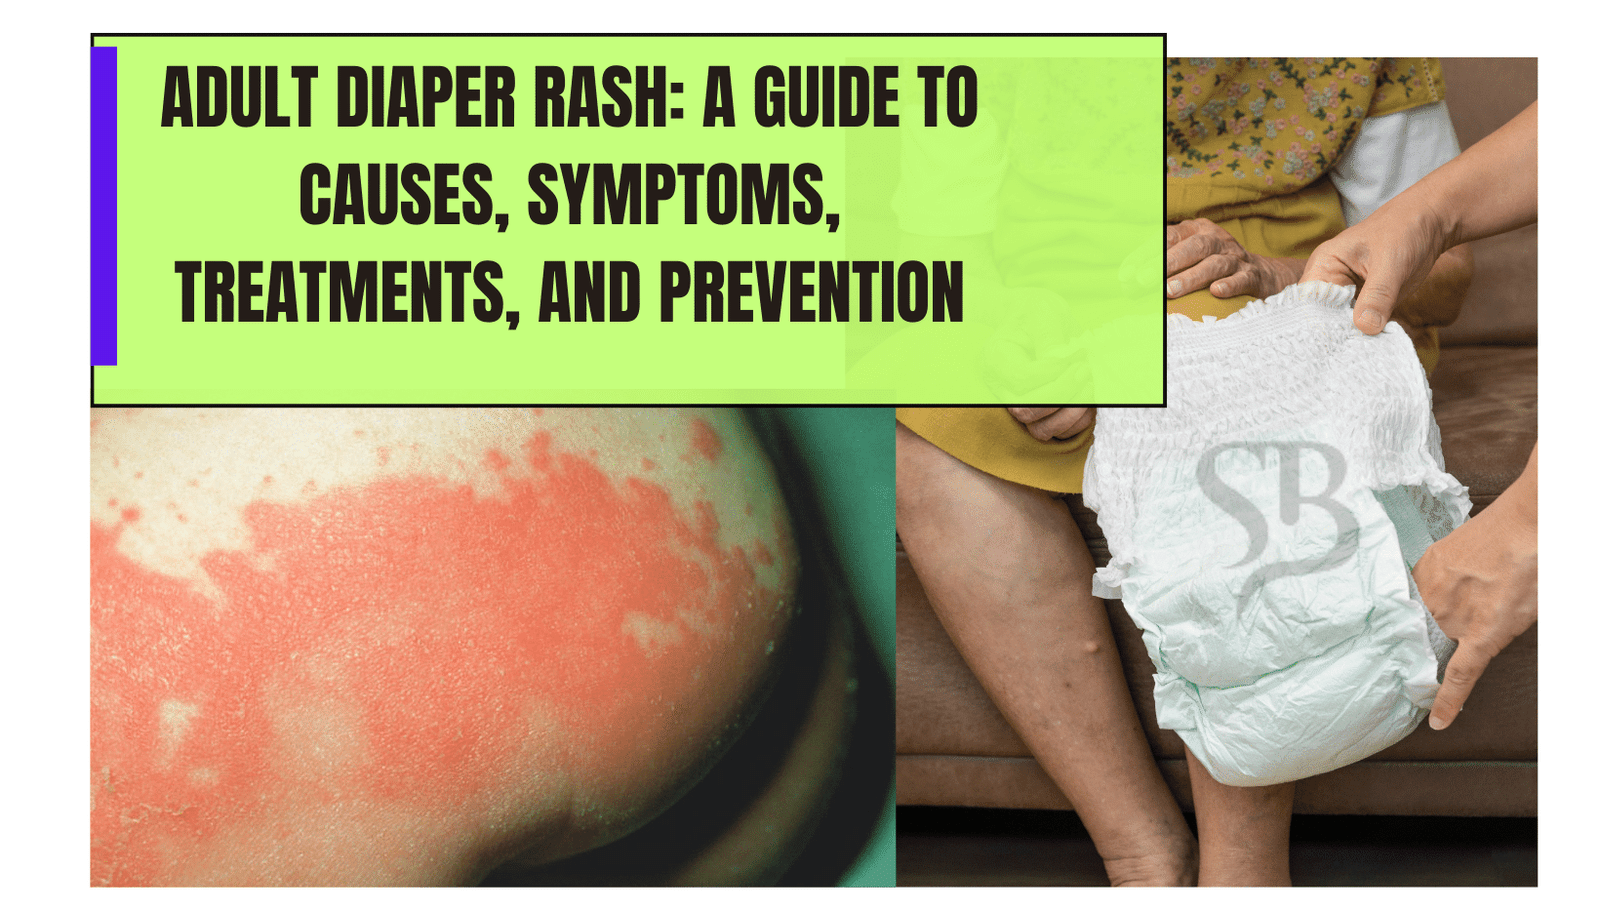 Adult Diaper Rash: A Guide to Causes, Symptoms, Treatments, And Prevention